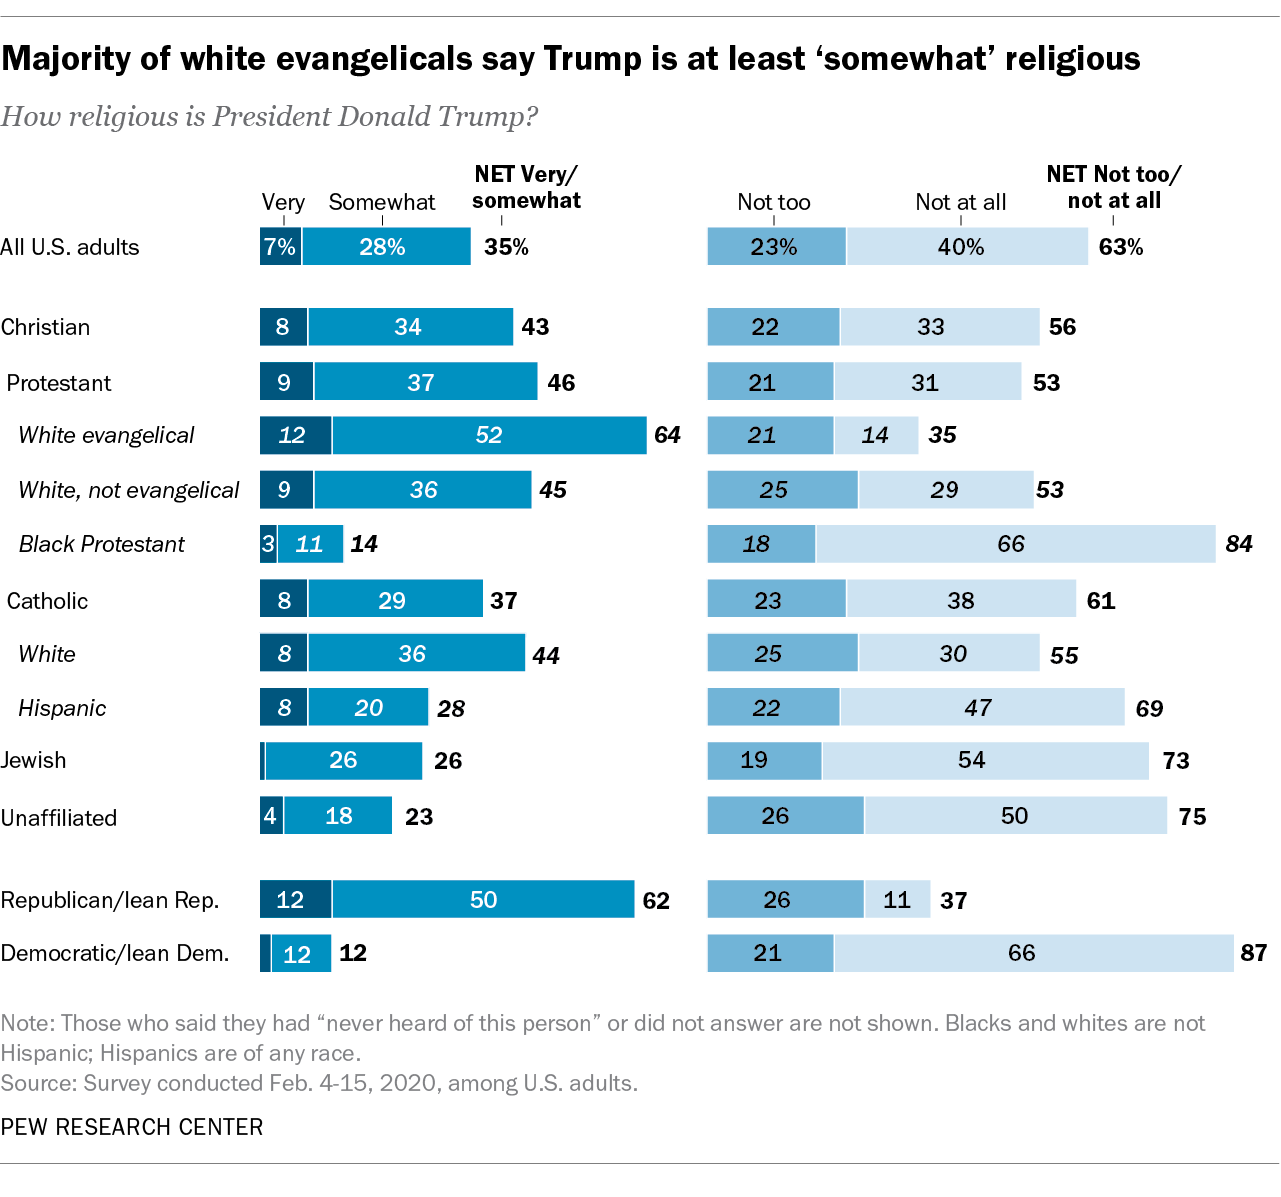 Majority of white evangelicals say Trump is at least ‘somewhat’ religious